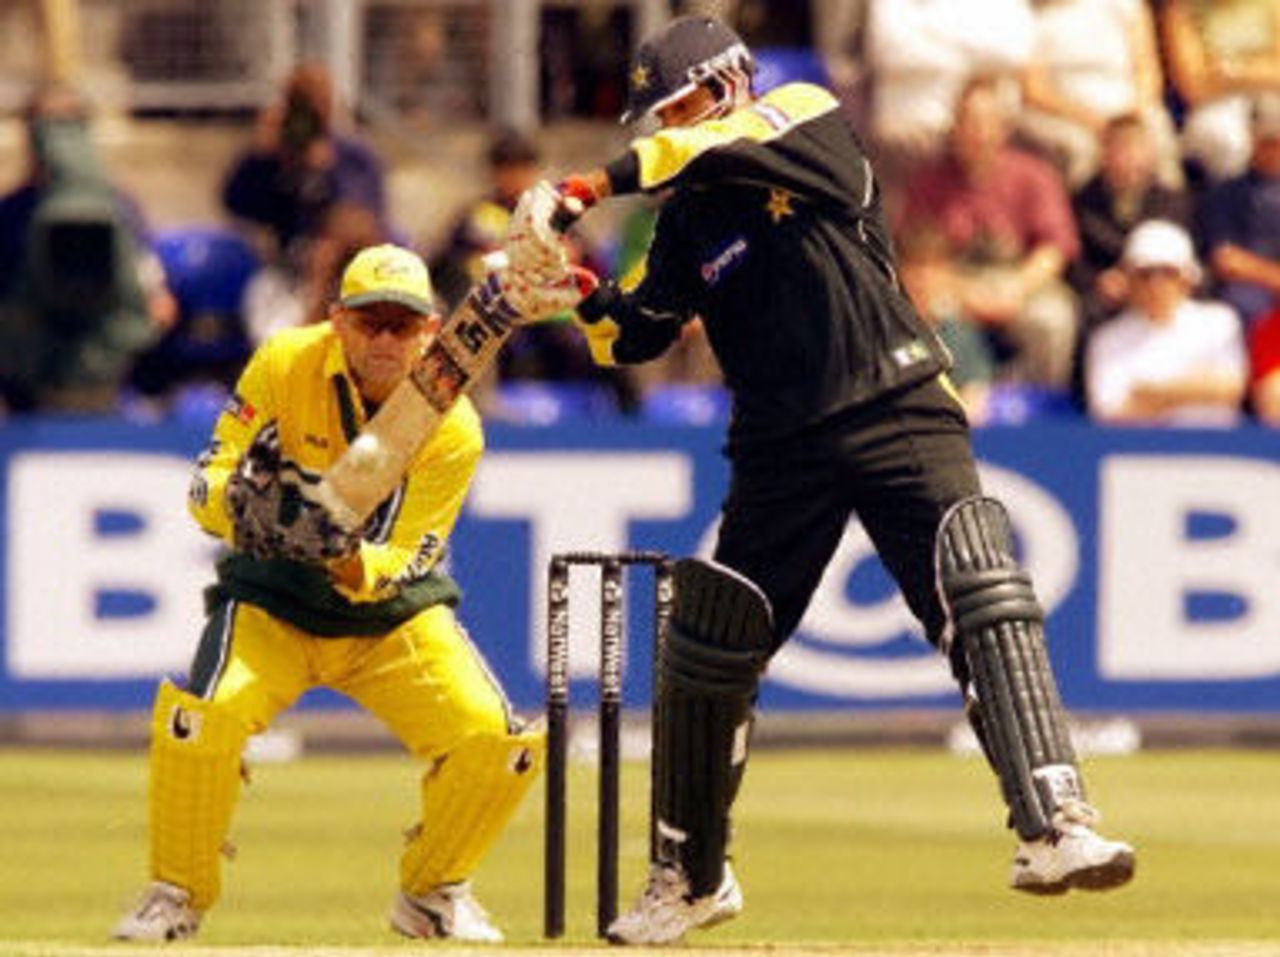 Yousuf Youhana cuts a ball as Adam Gilchrist looks on, 2nd ODI at Cardiff, 9 June 2001